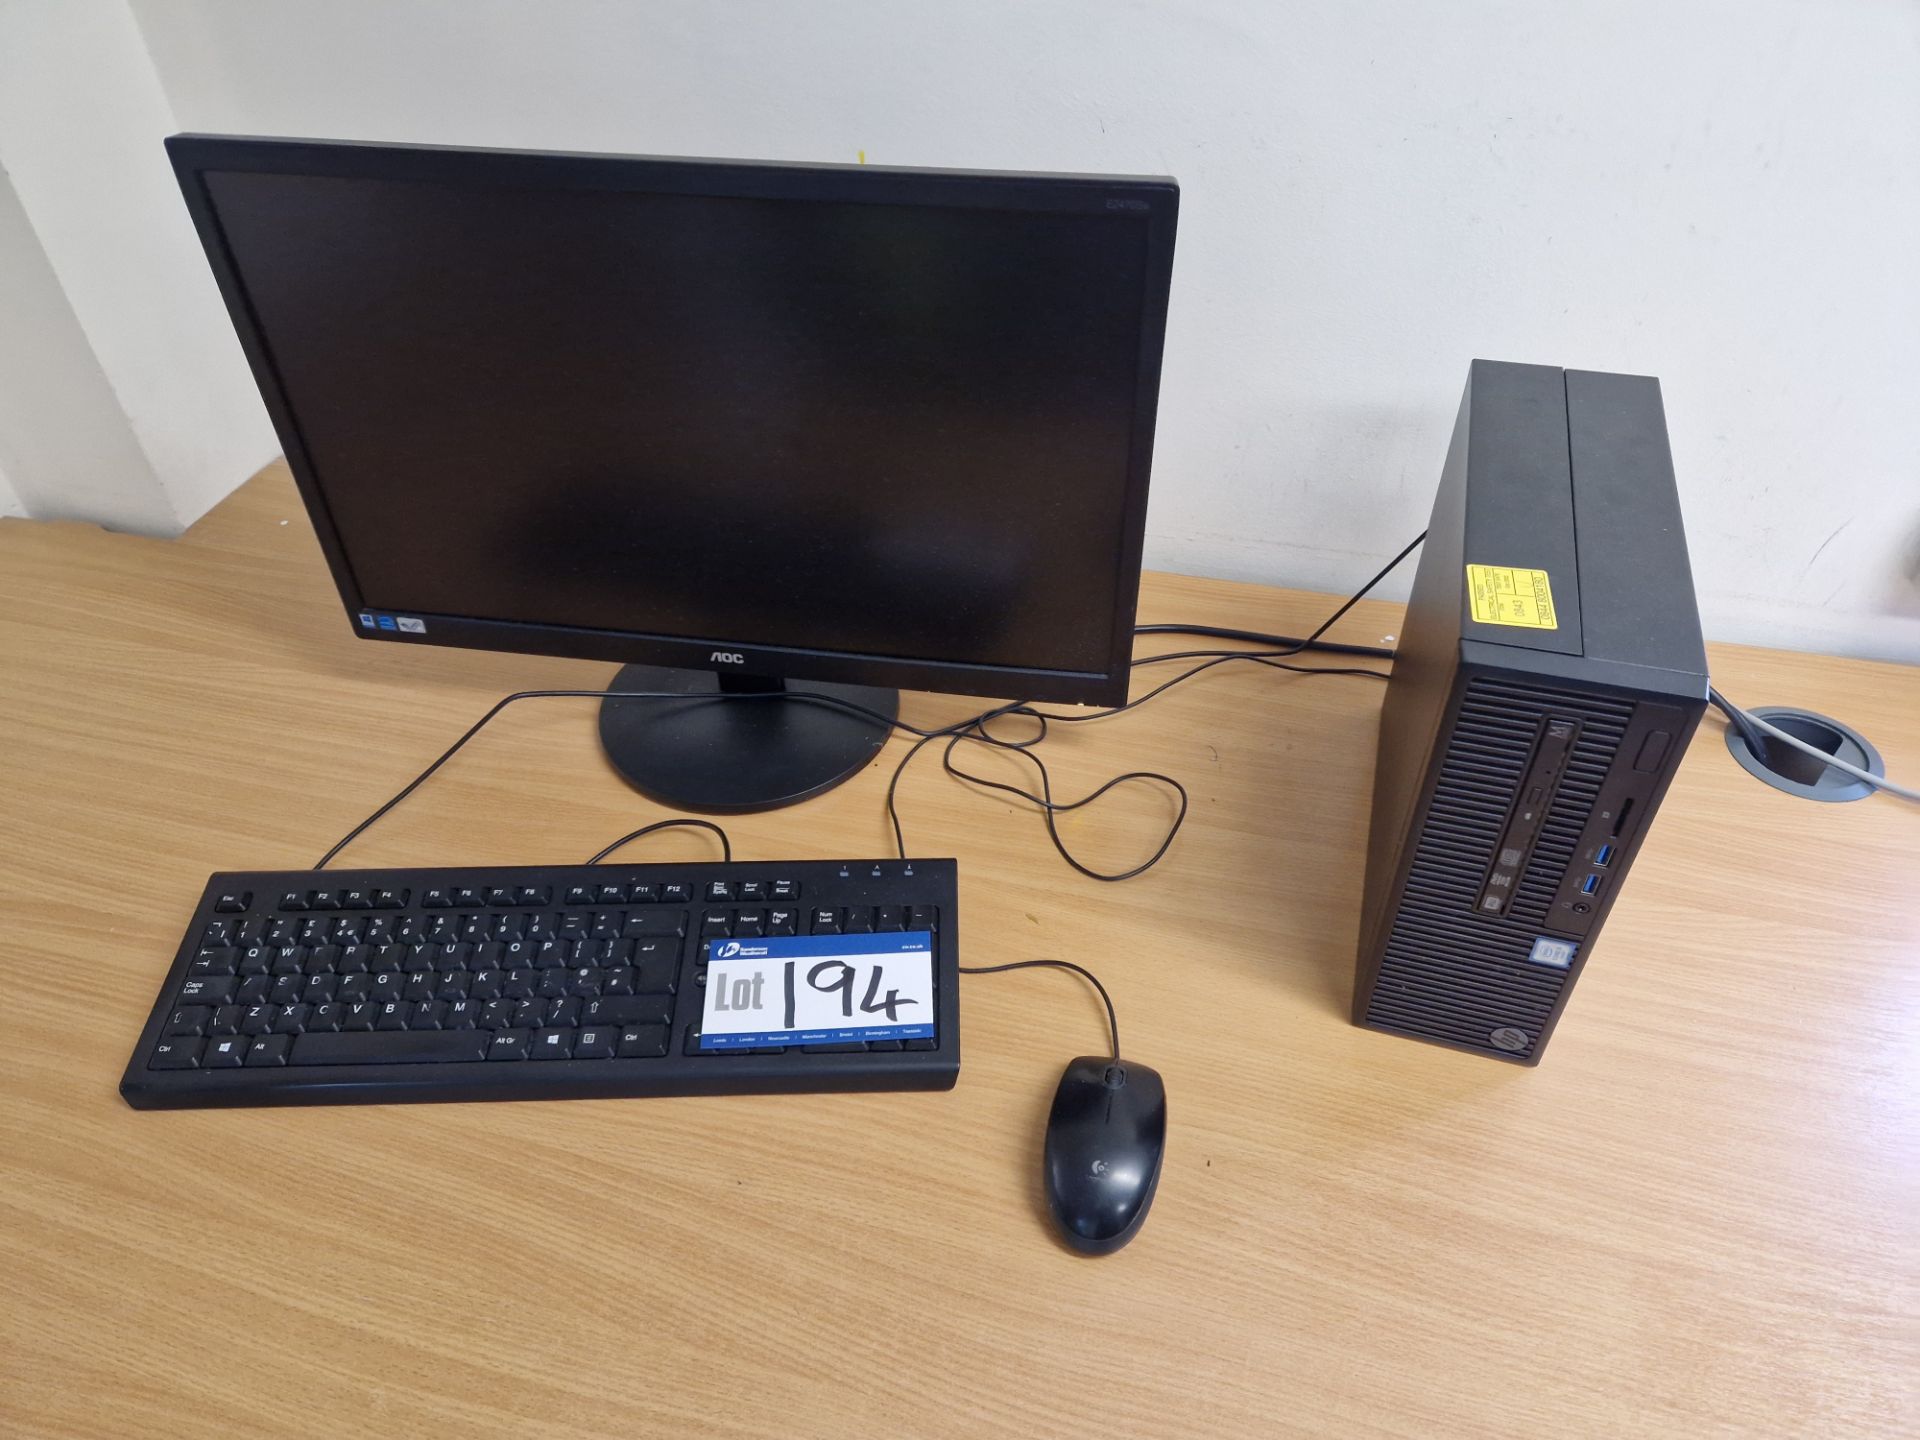 HP 280 G2 SFF Business PC, with Intel core i5 processor, flat screen monitor, keyboard and mouse (